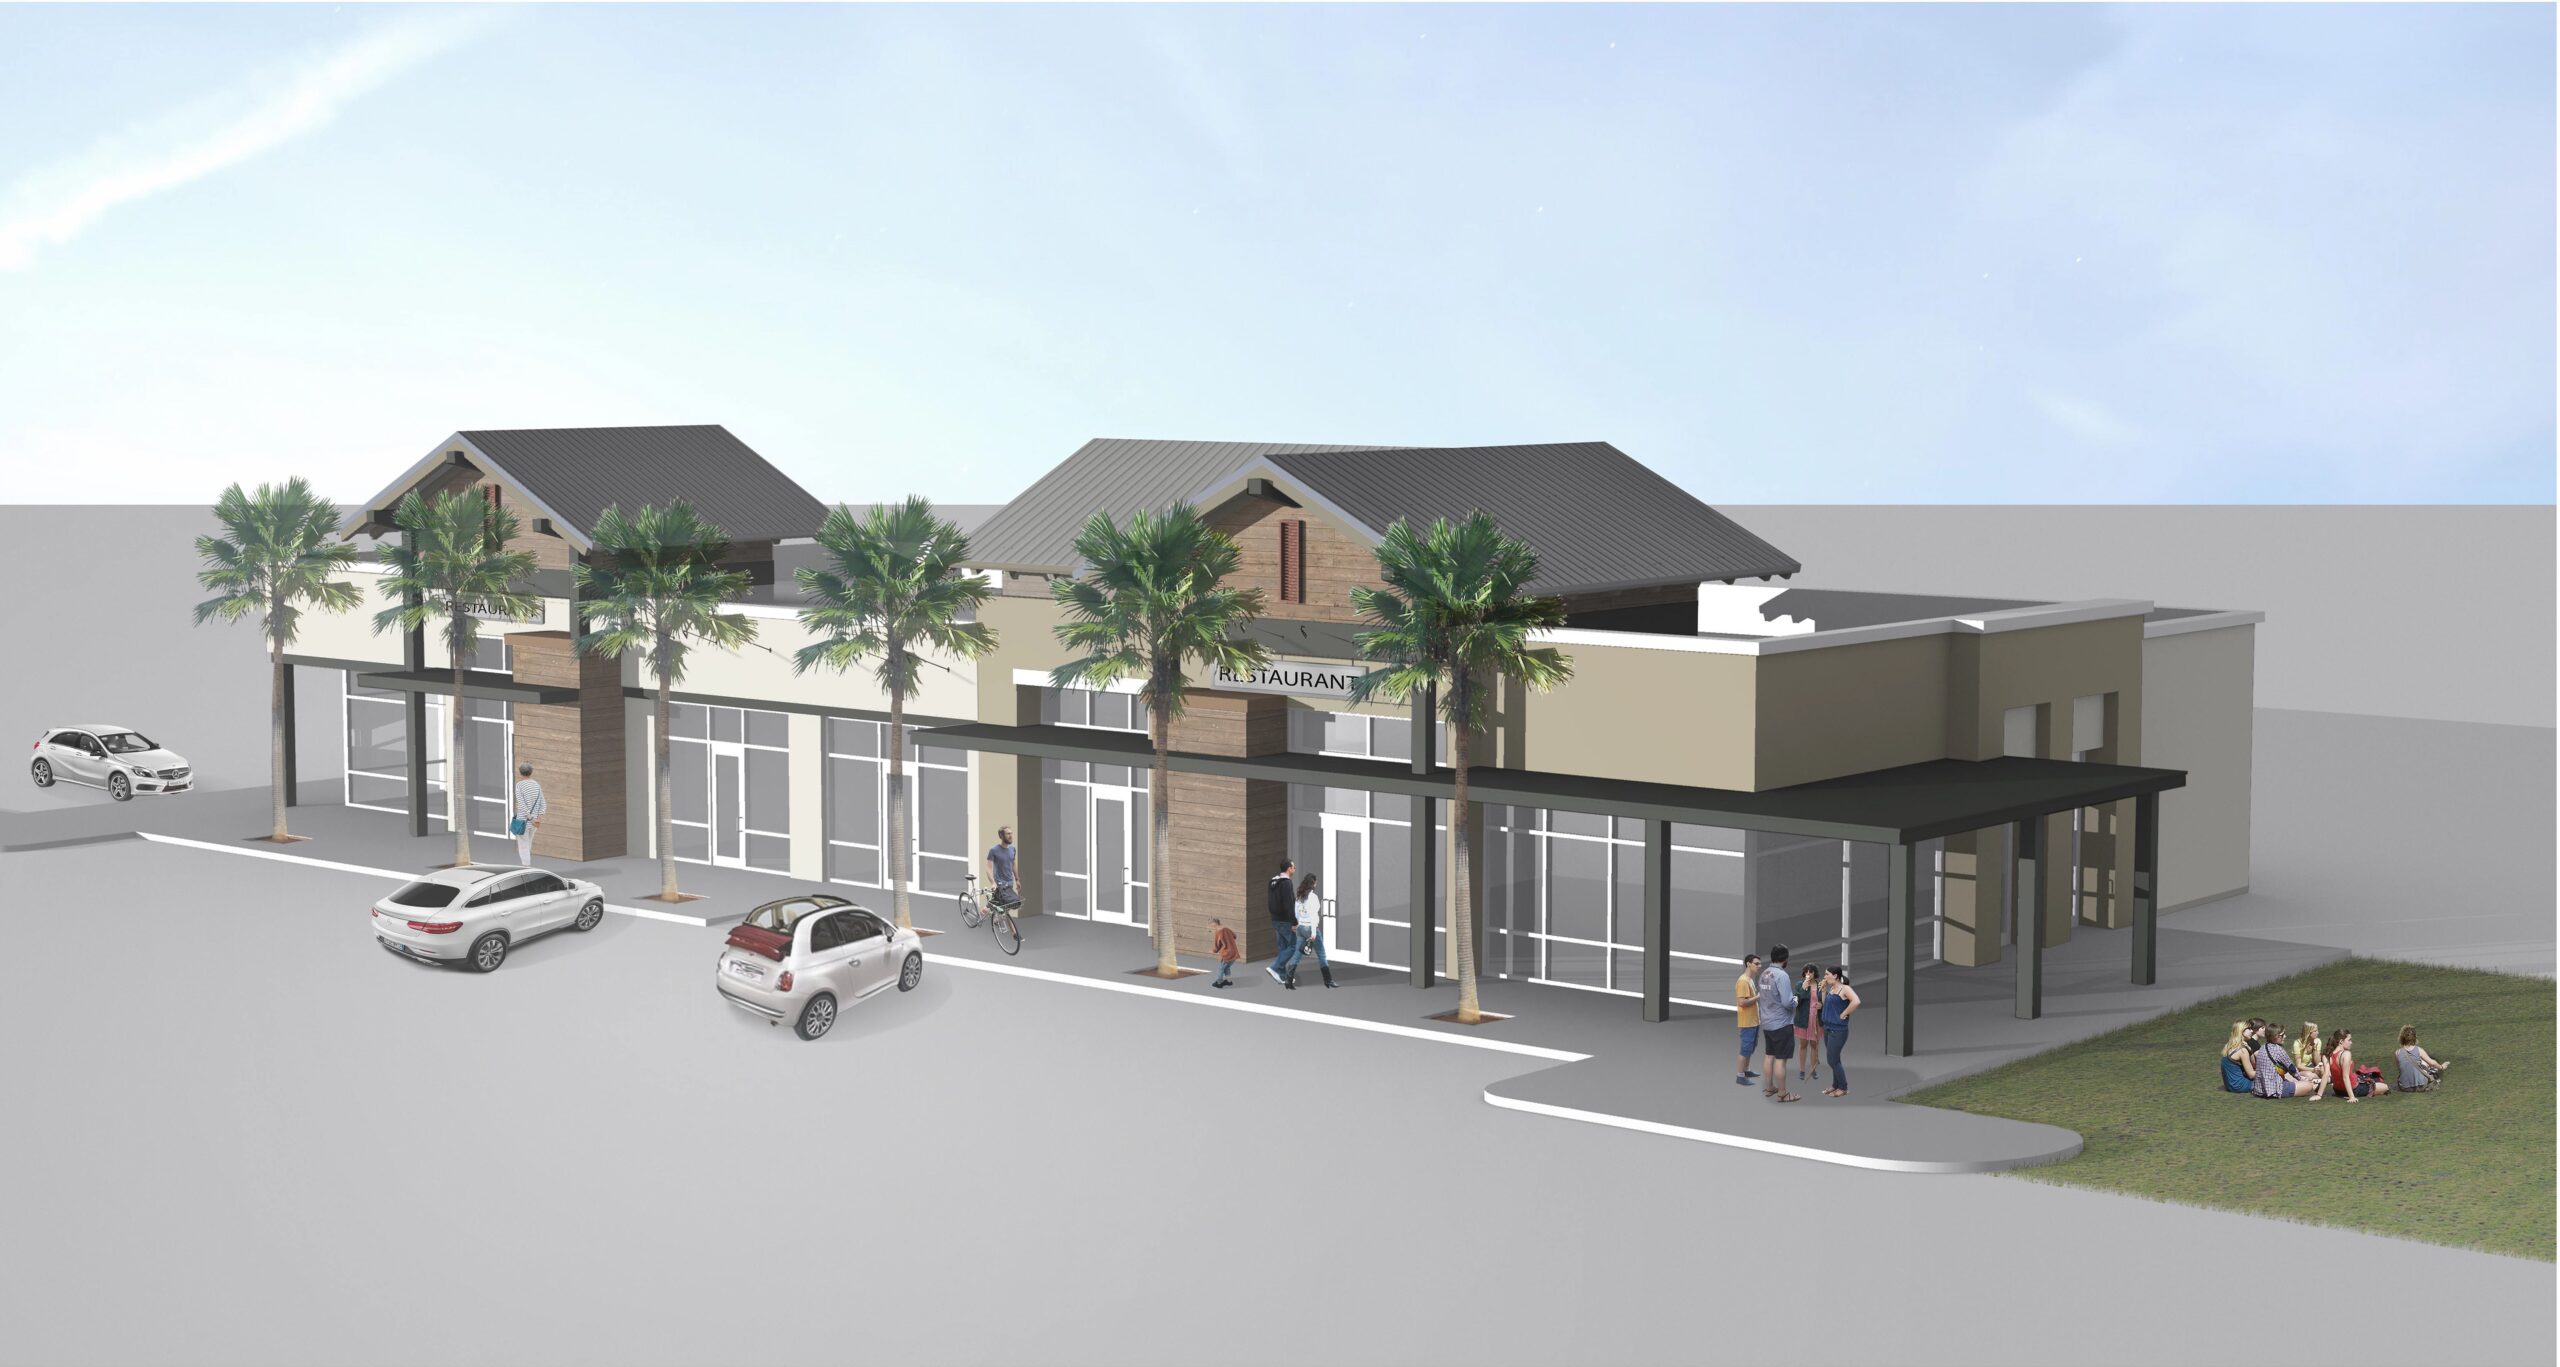 Exterior rendering of Skinner Bros. Realty's new multi-tenant complex that will feature Tasty's Burgers and Fries and Cold Stone Creamery.